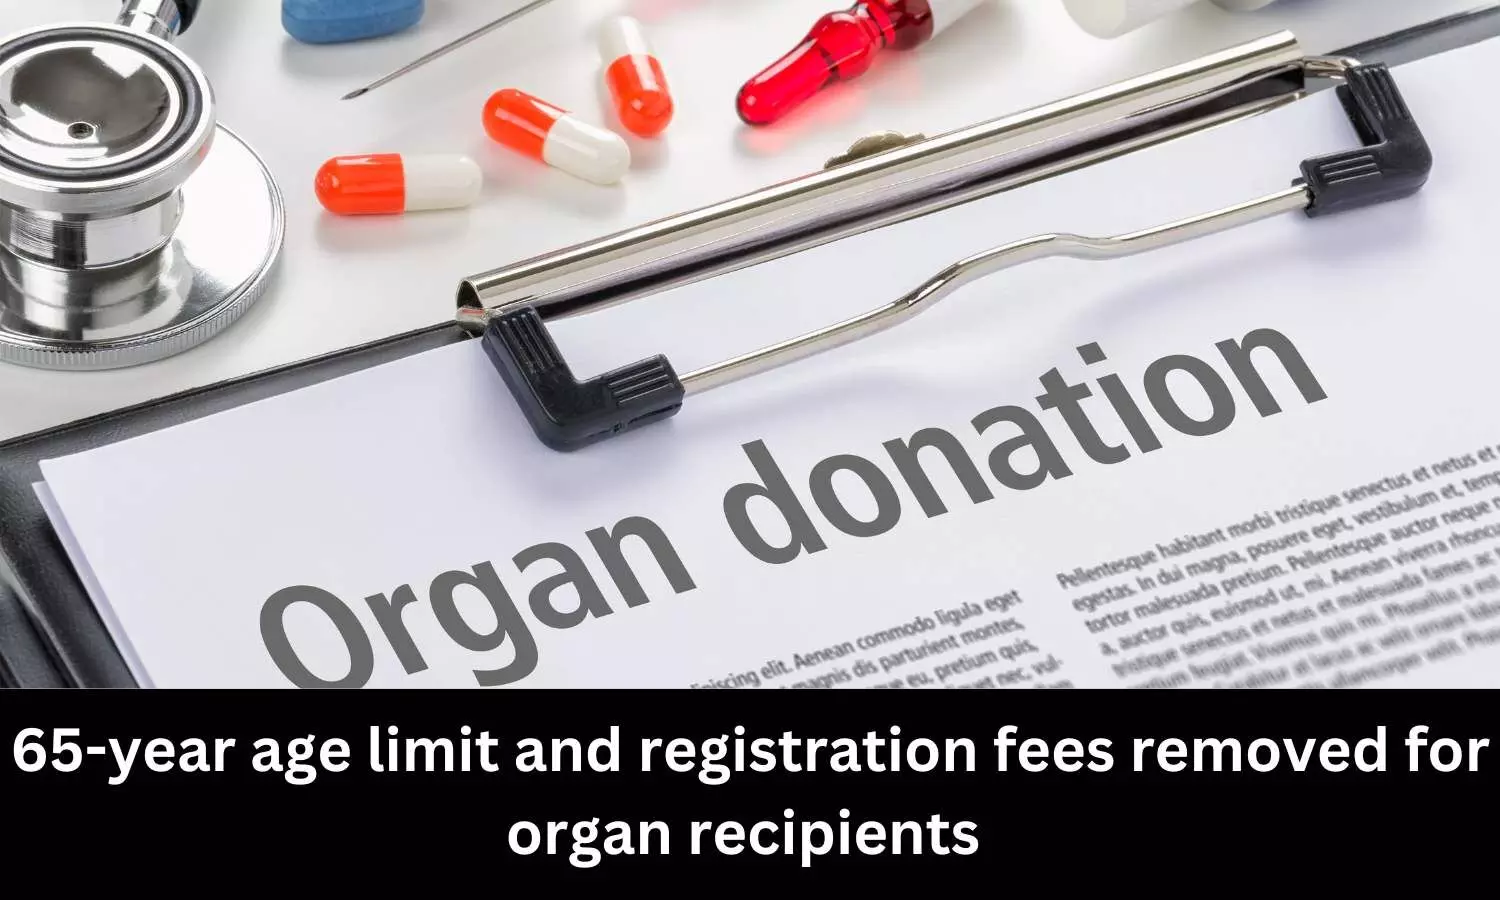 Patients aged 65 and above can now register for seeking organs